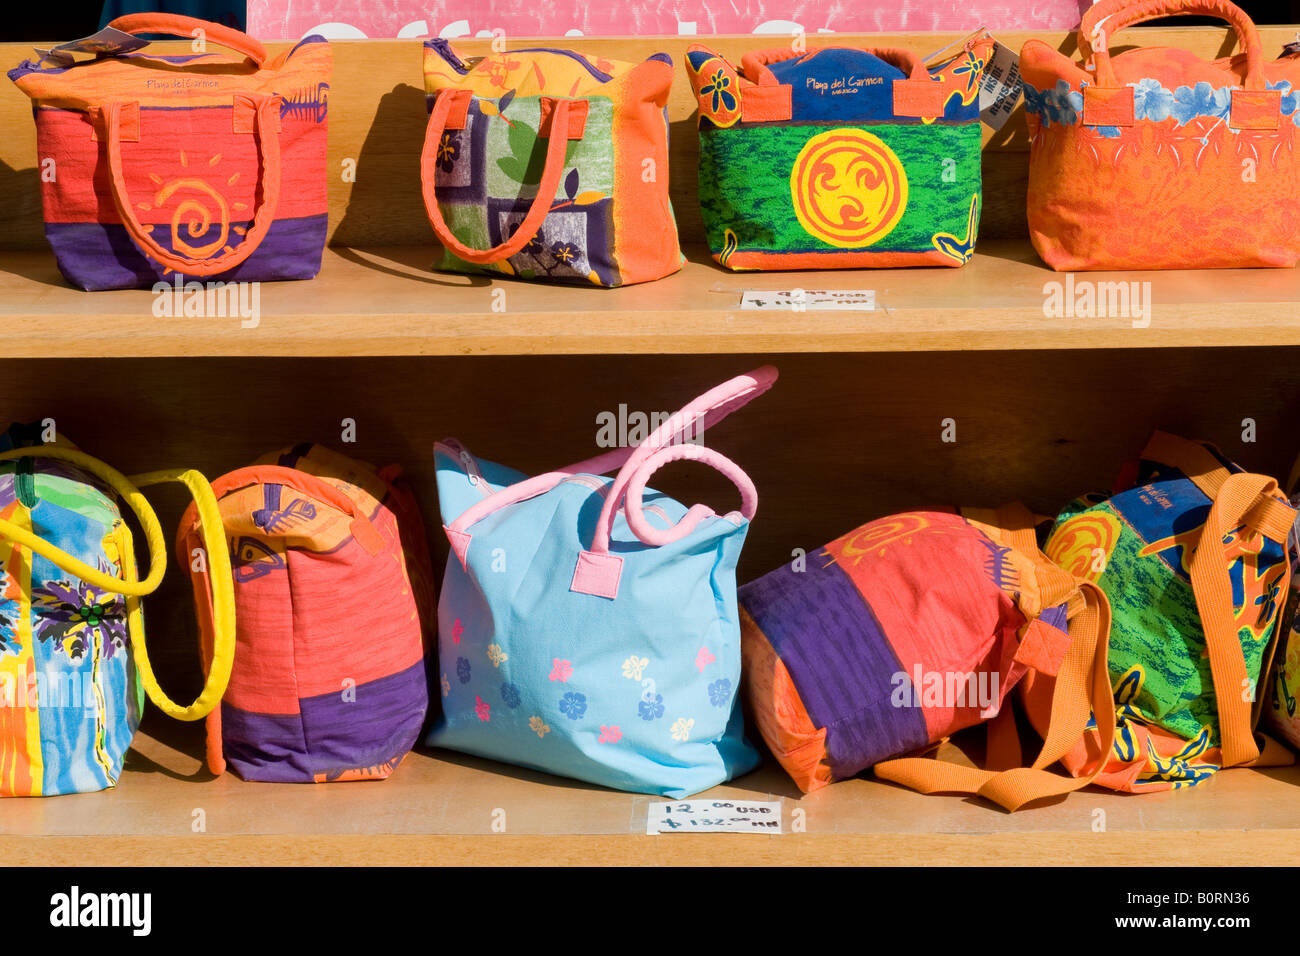 Bags for sale in Playa del Carmen Mexico Stock Photo - Alamy